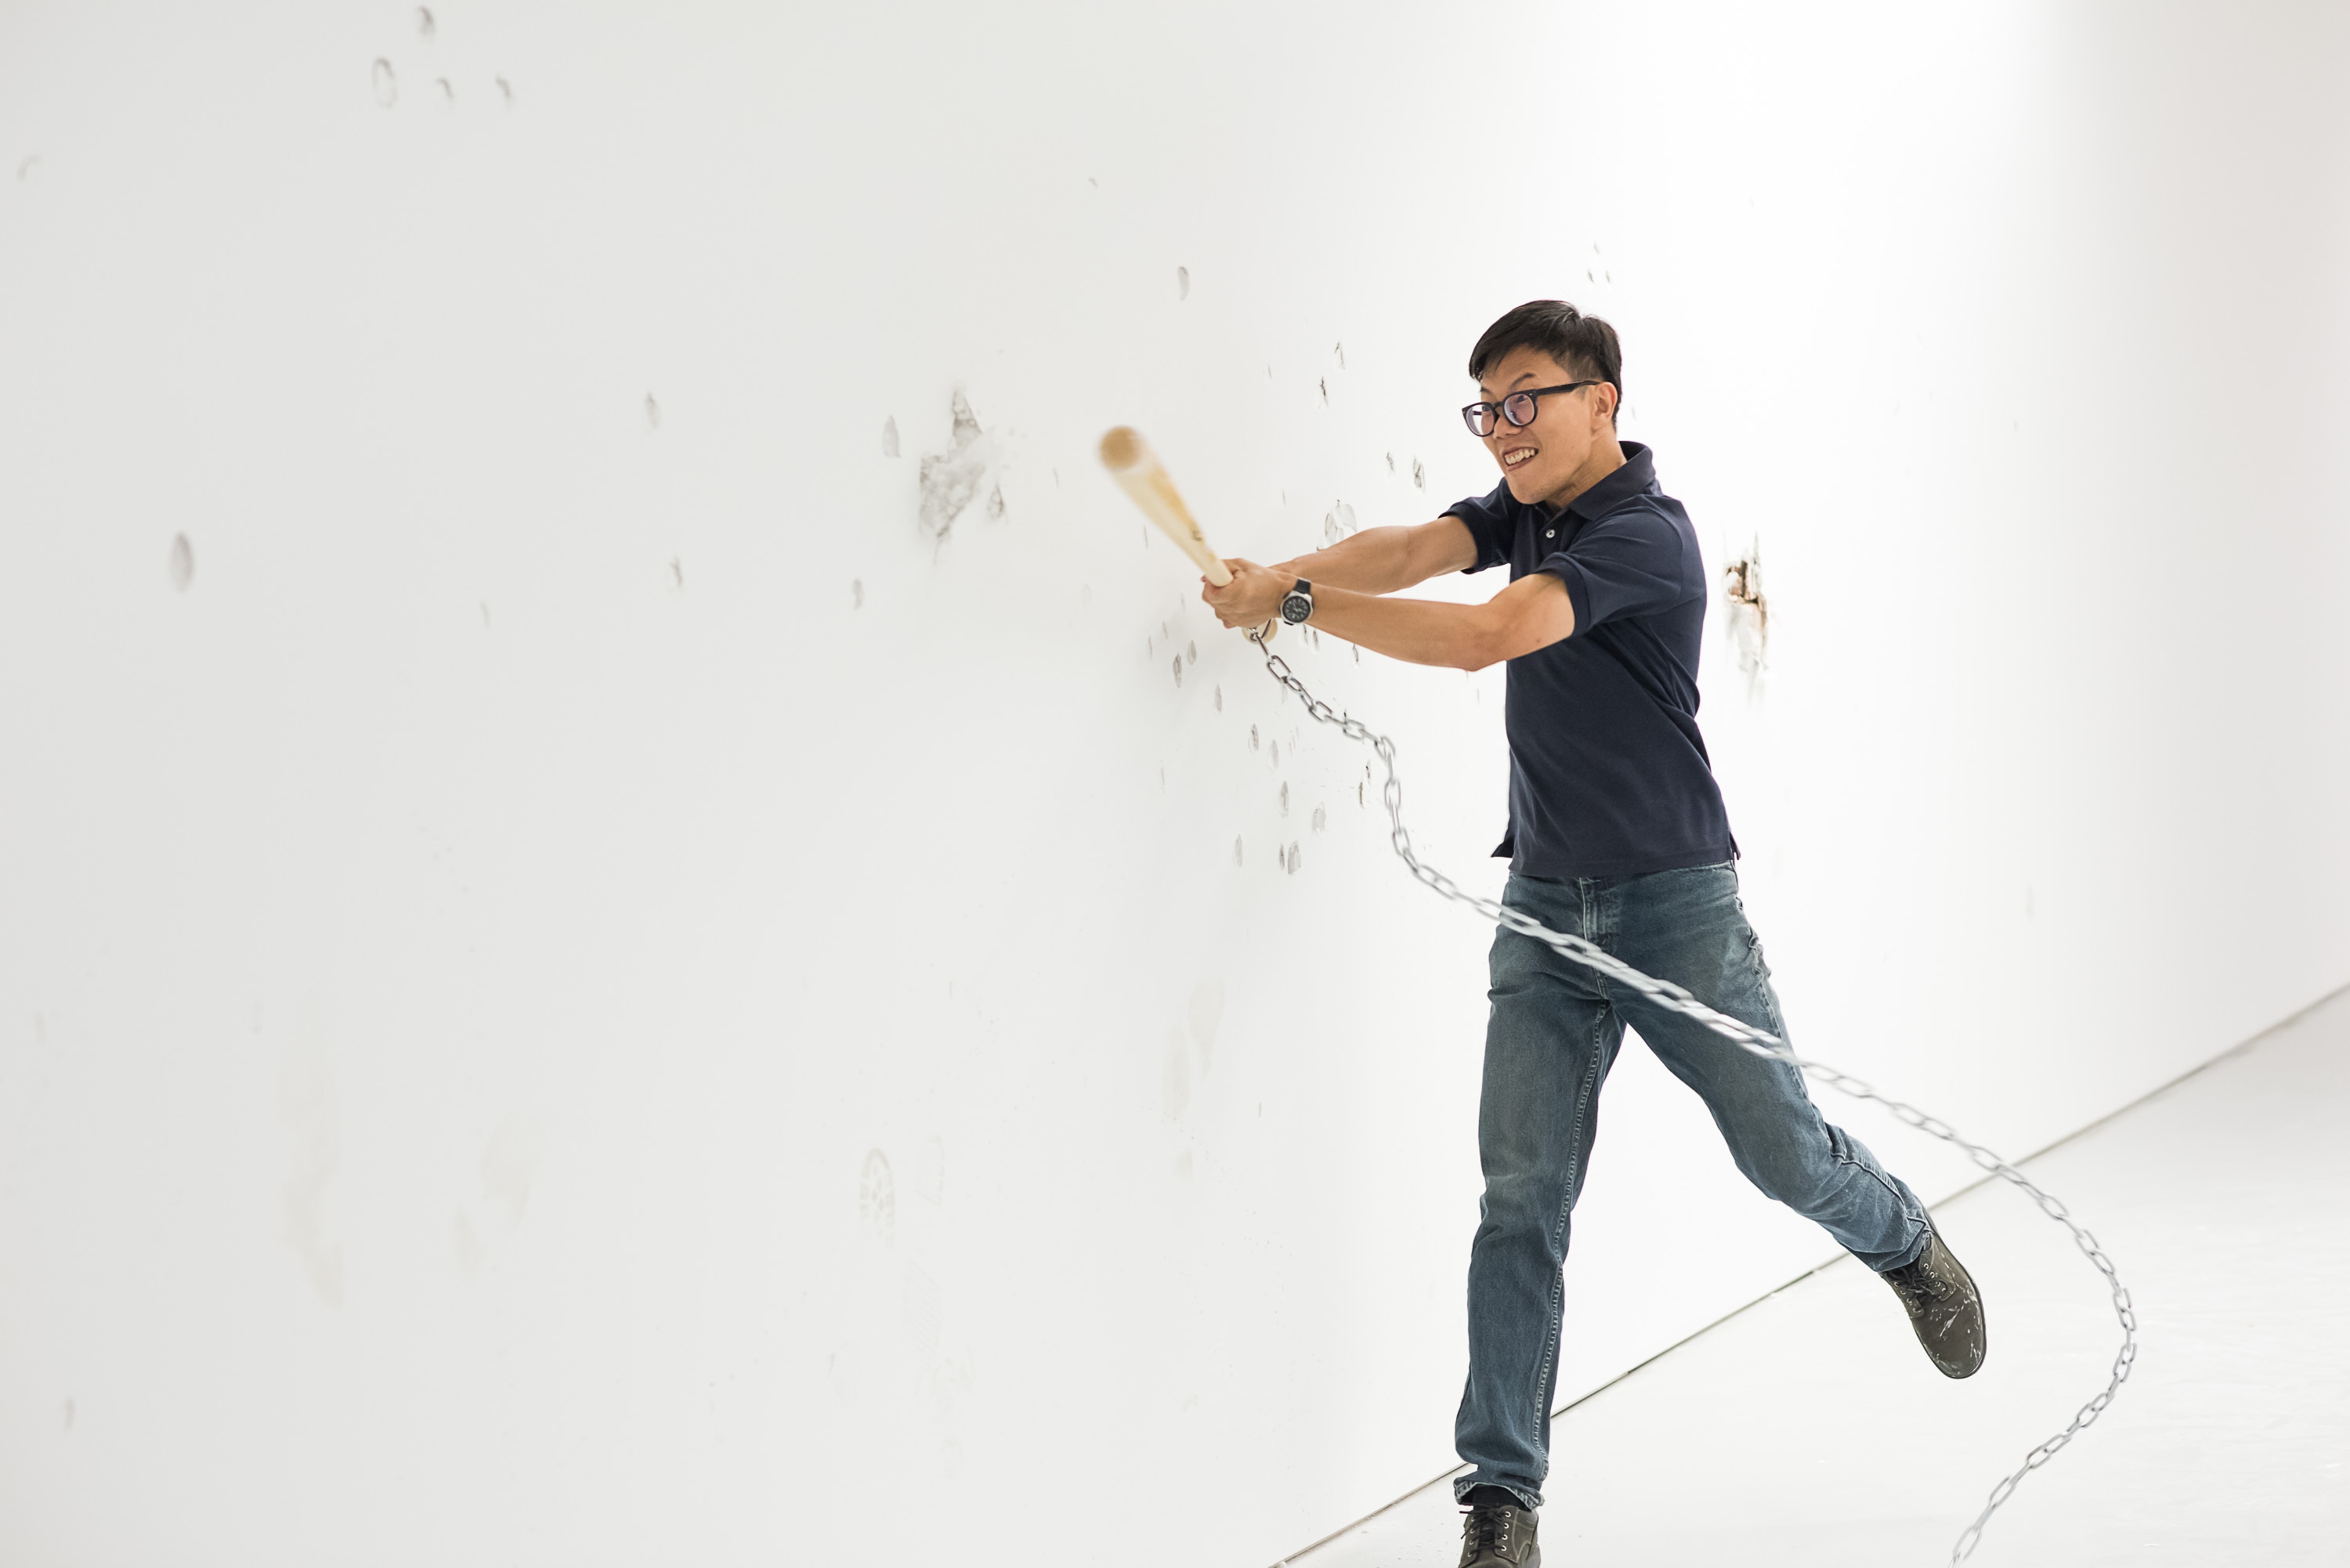 An Asian man uses a baseball bat attached to a chain to hit a white gallery wall. Indents can be seen in the wall.